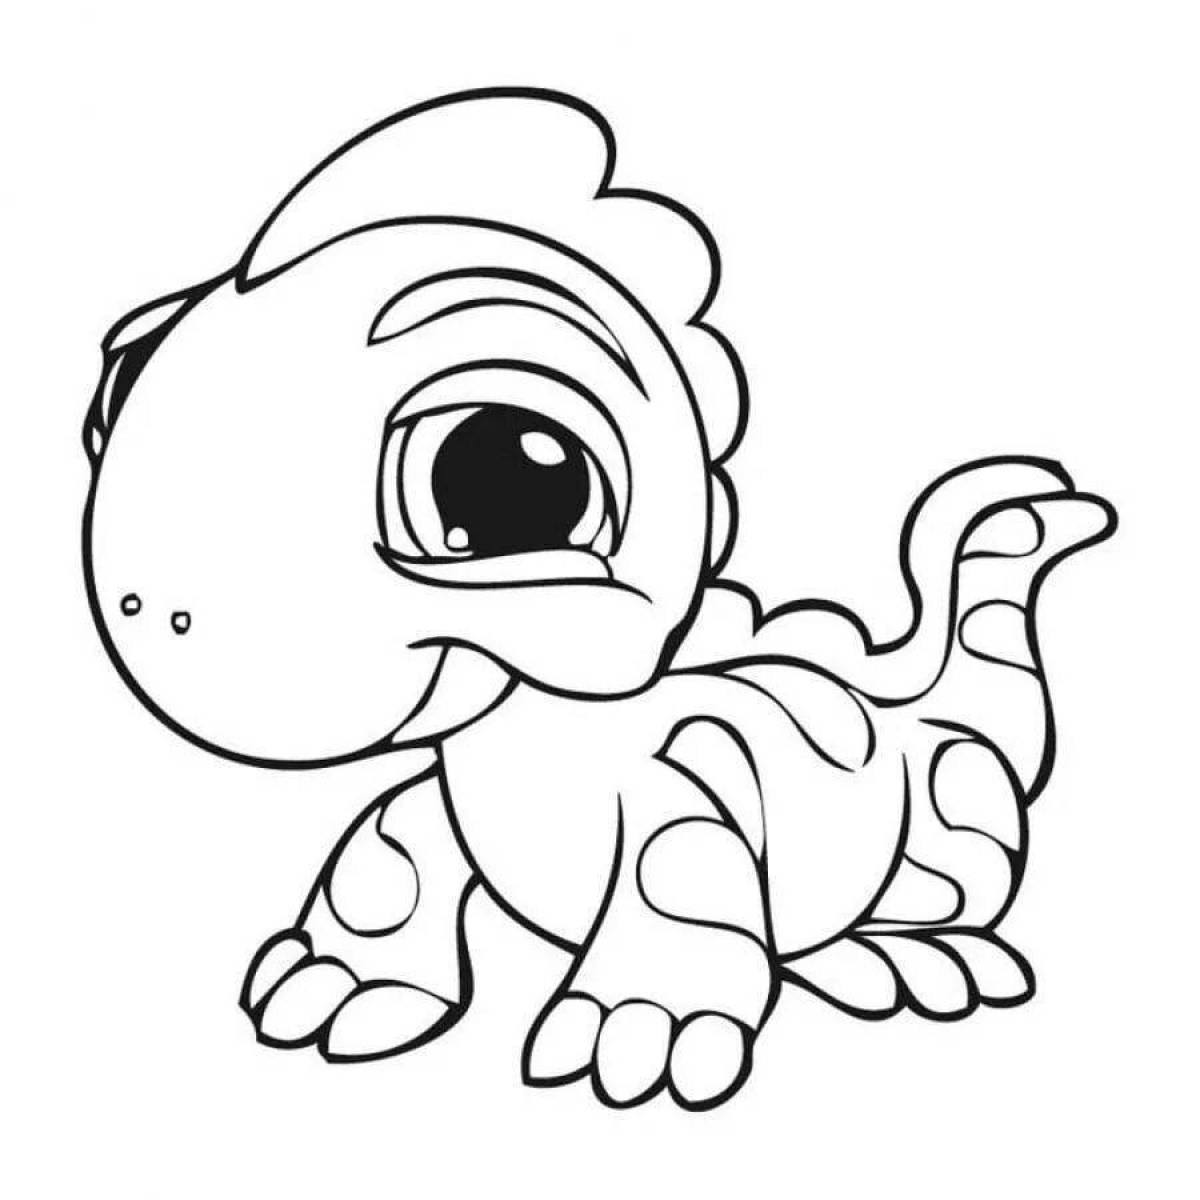 Cute and funny dinosaur coloring book